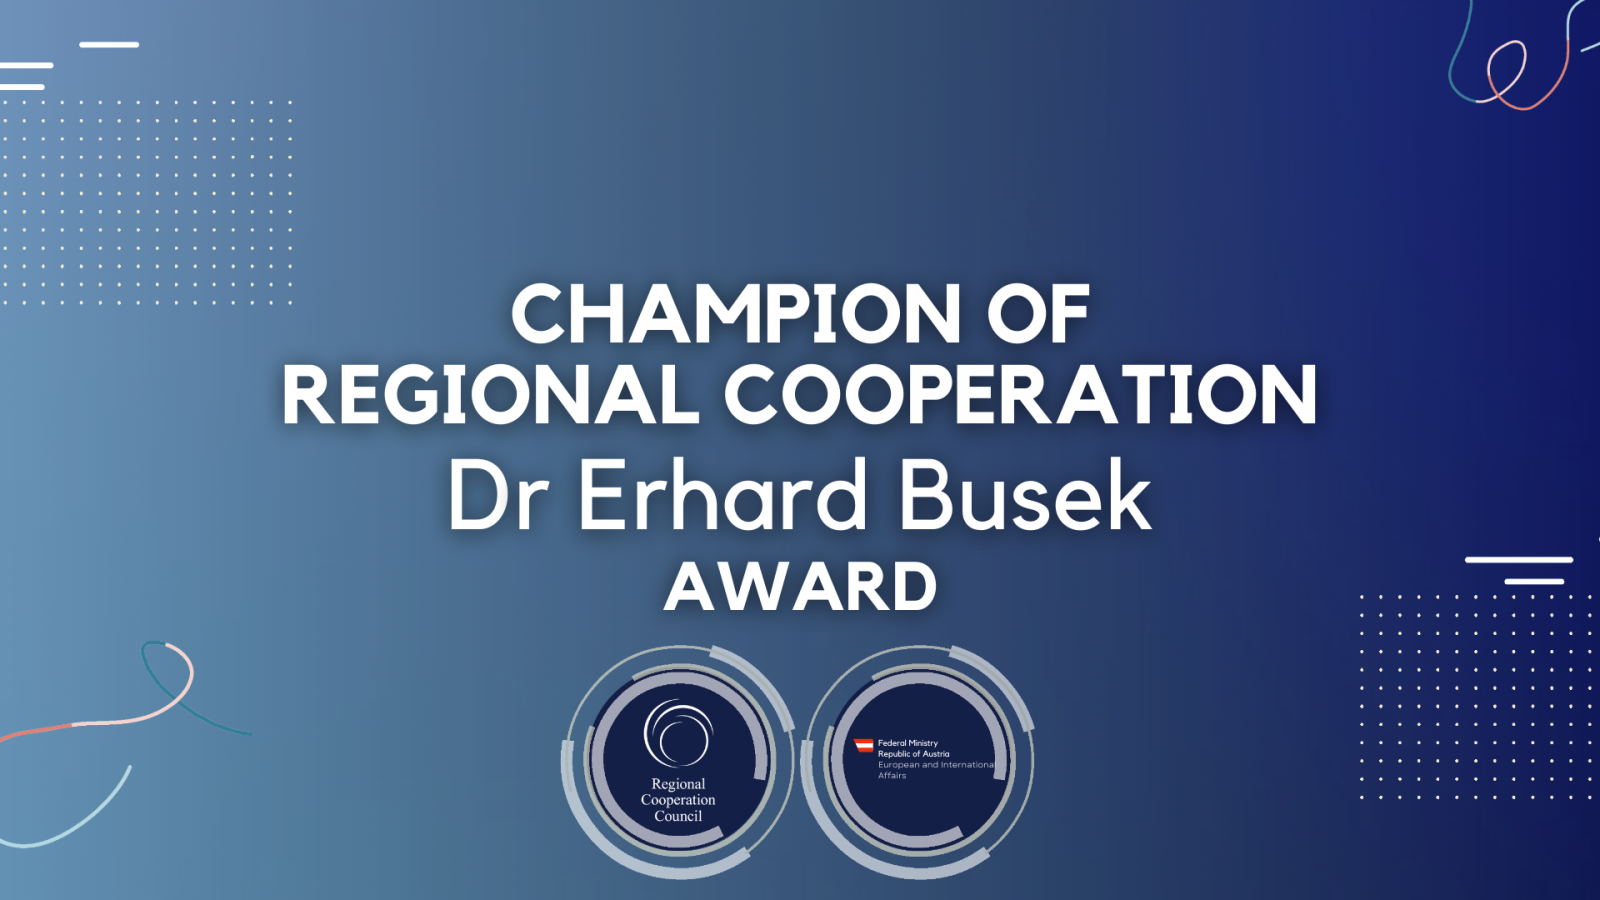 Nominations for the Champion of Regional Cooperation Dr Erhard Busek Award are officially open!